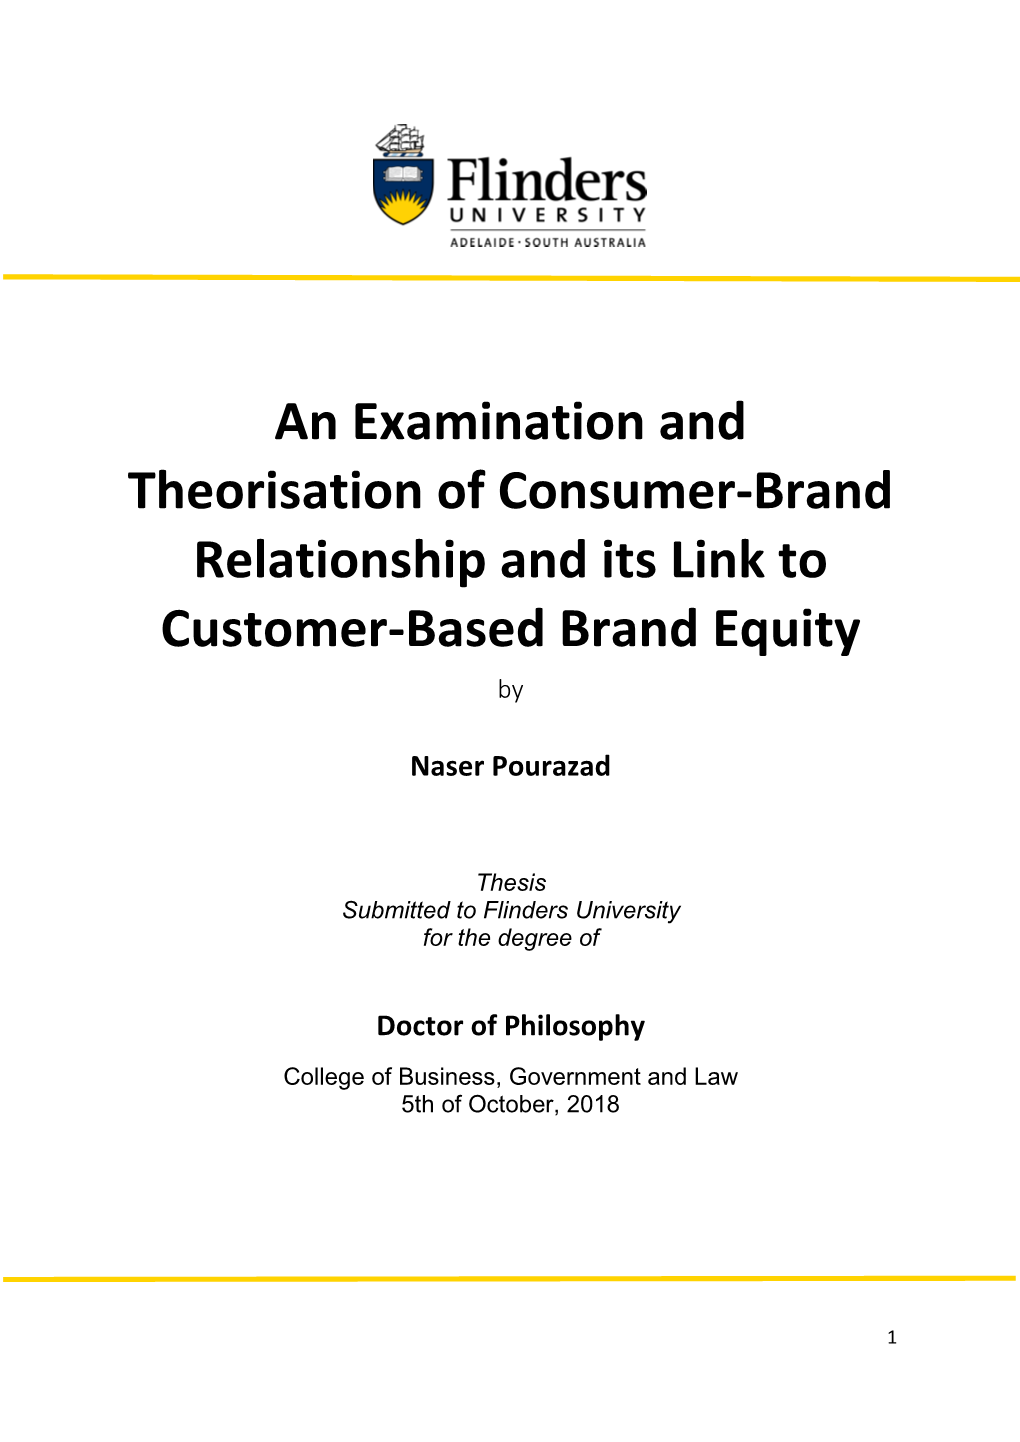 An Examination and Theorisation of Consumer-Brand Relationship and Its Link to Customer-Based Brand Equity By